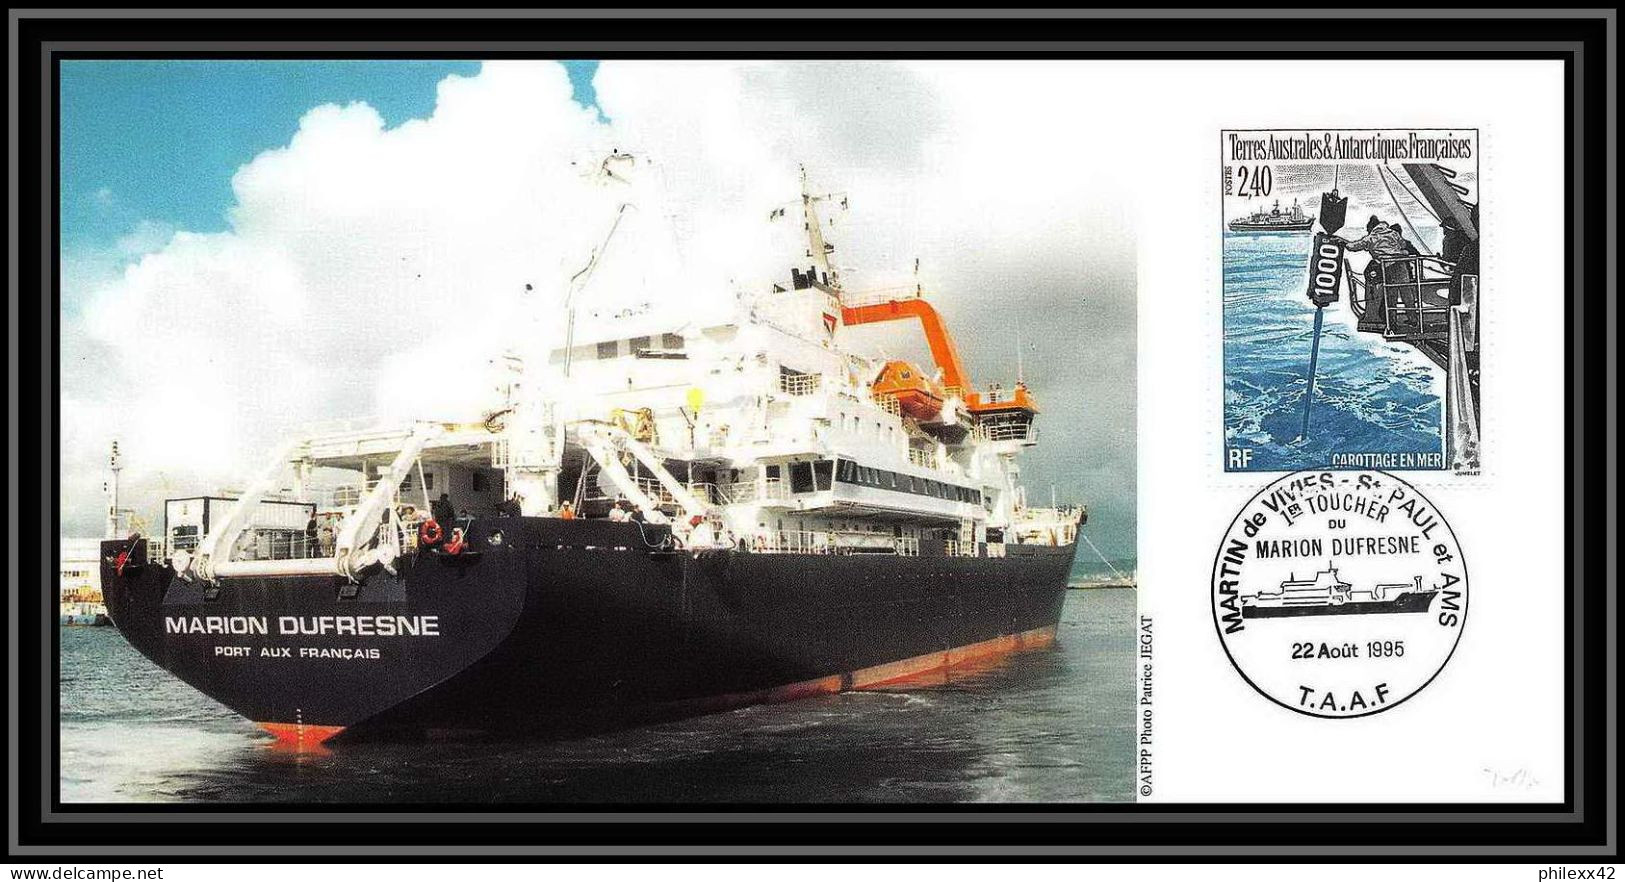 2349 ANTARCTIC Terres Australes TAAF Lettre Cover Dufresne 2 N°187 Amsterdam Premier Toucher 22/8/1995 - Covers & Documents